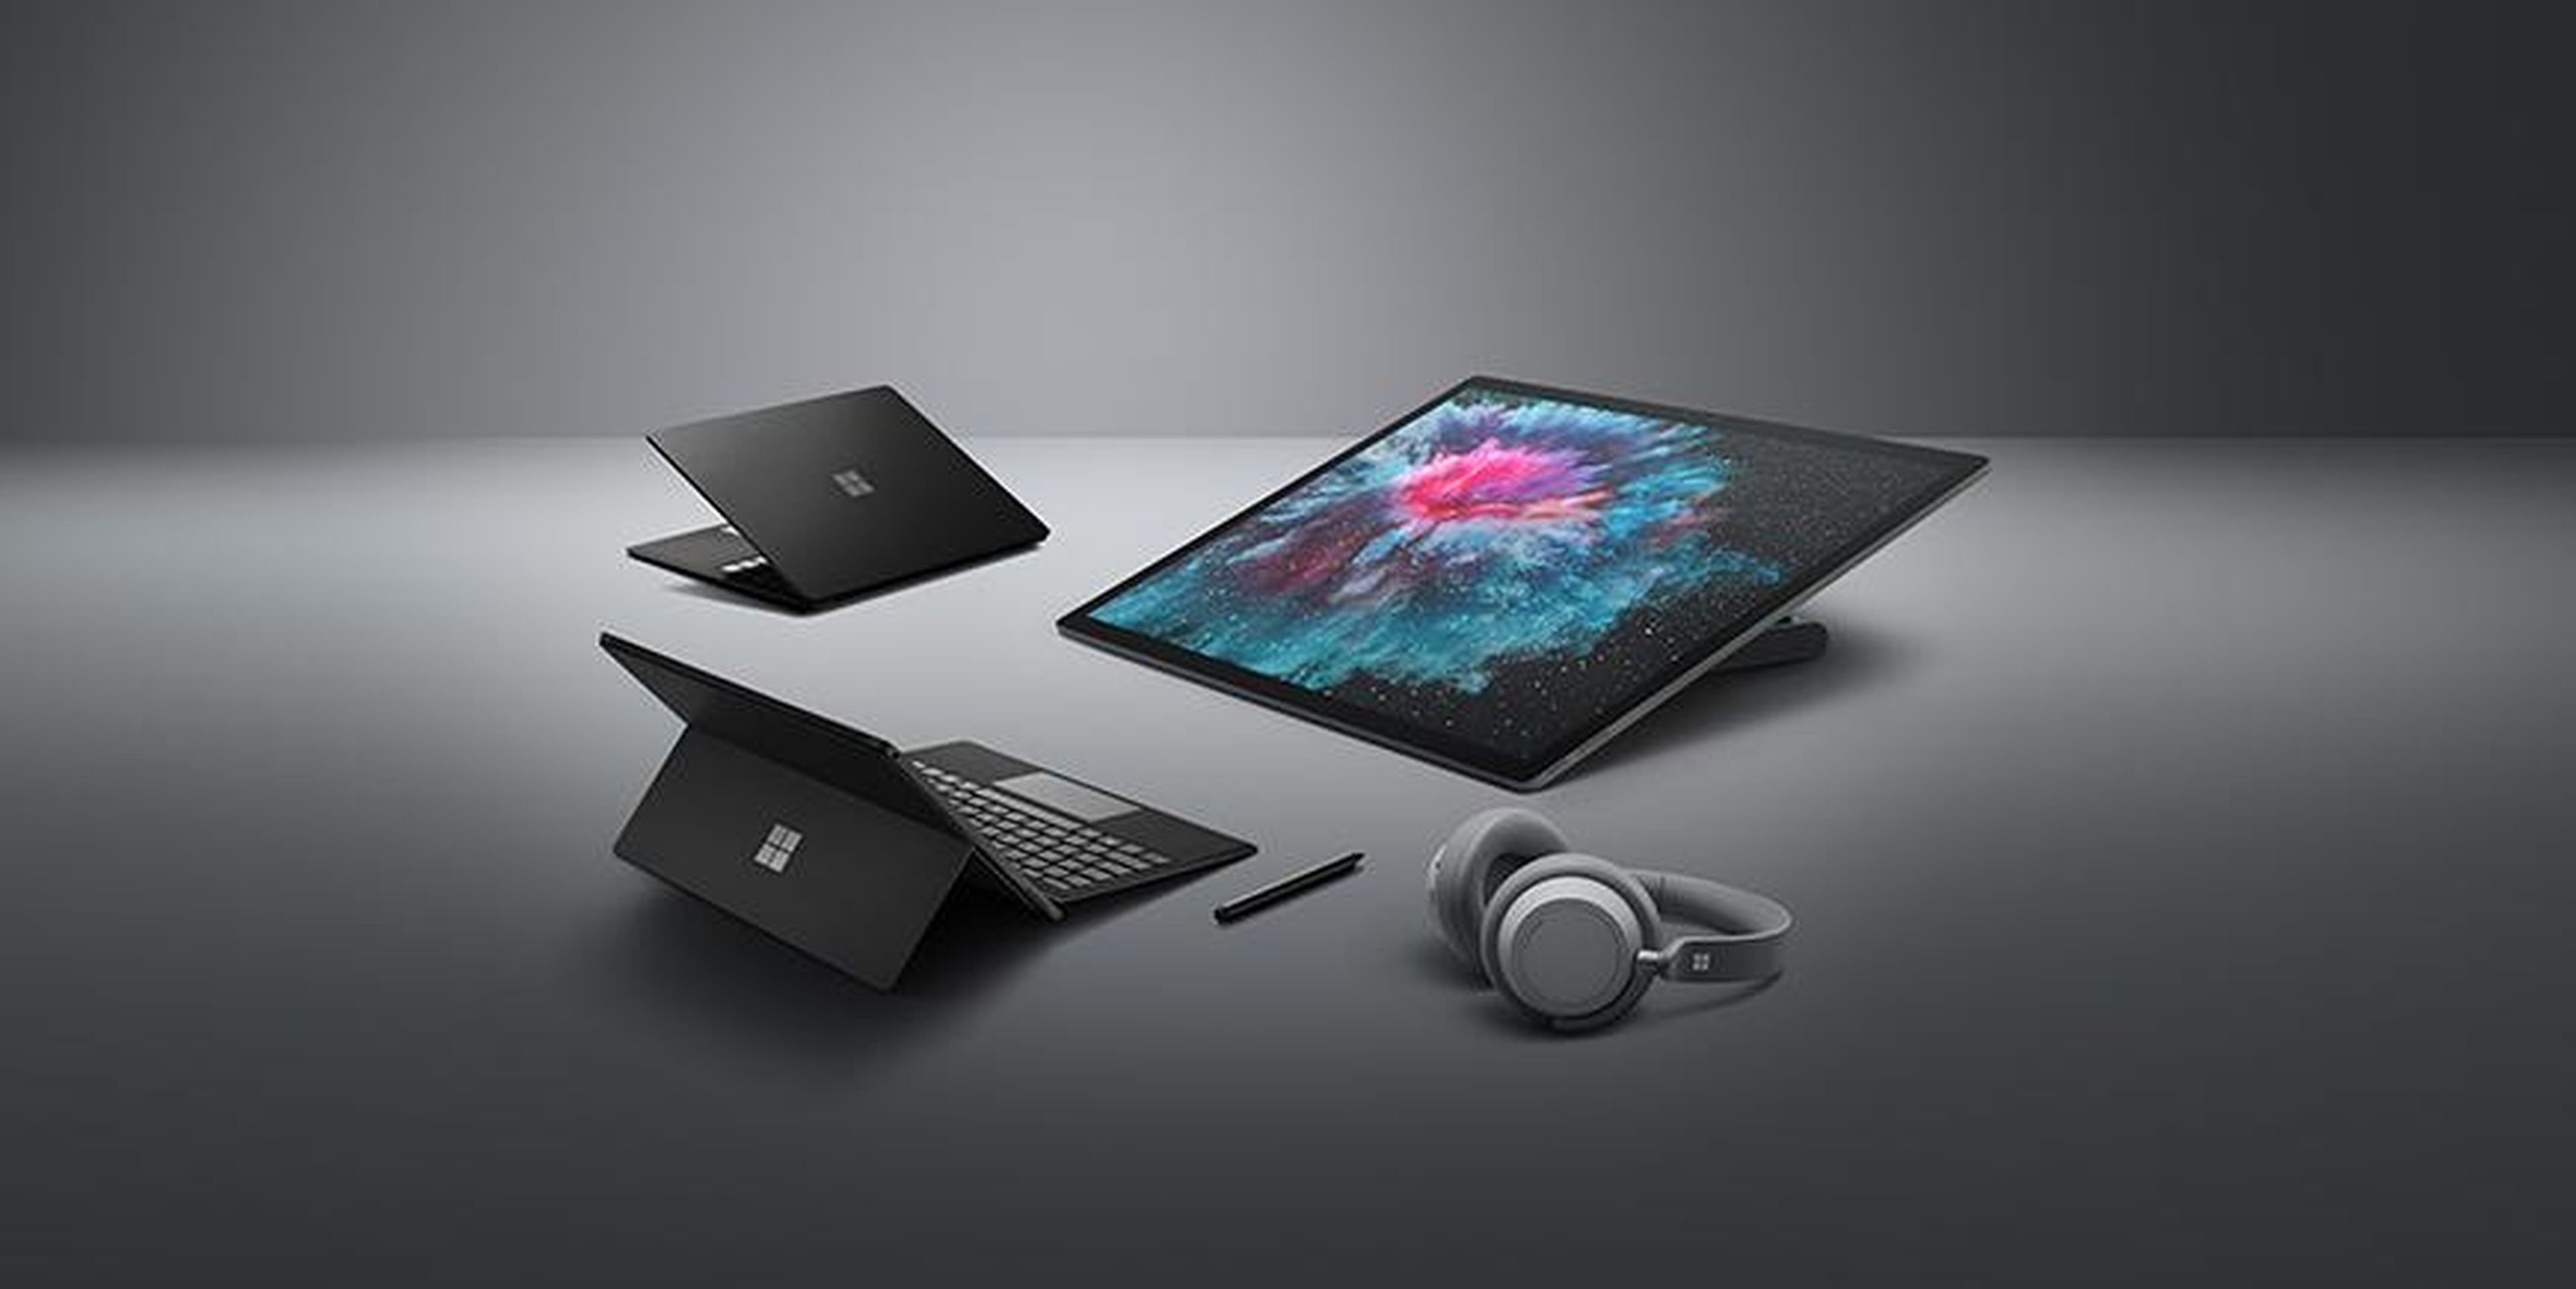 Microsoft just announced three new premium Surface computers and a pair of headphones — and we got to try all of them